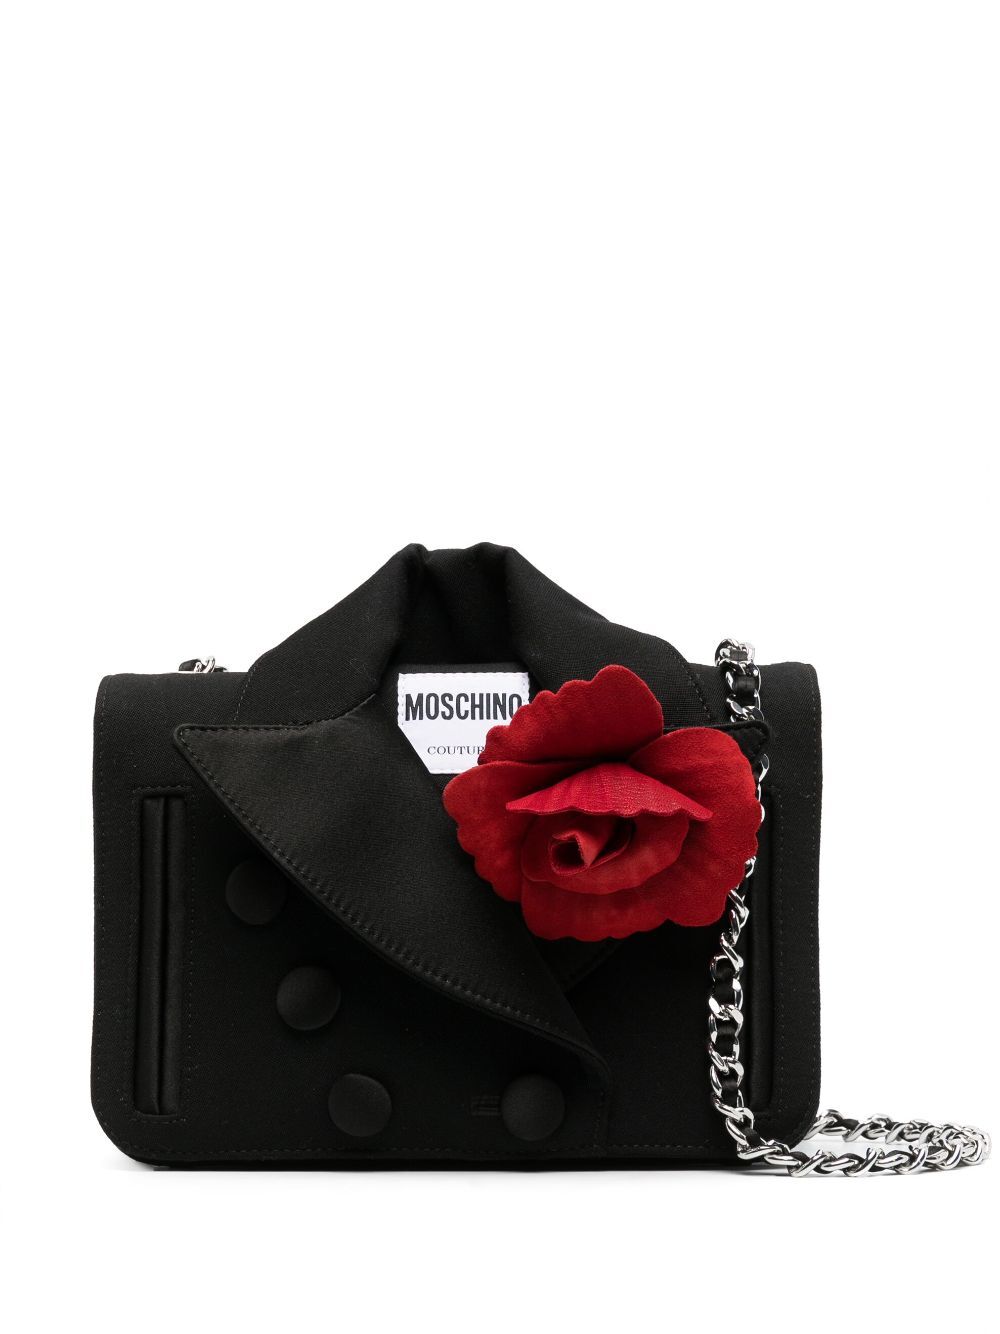 Moschino rose jacket chained bag - Black